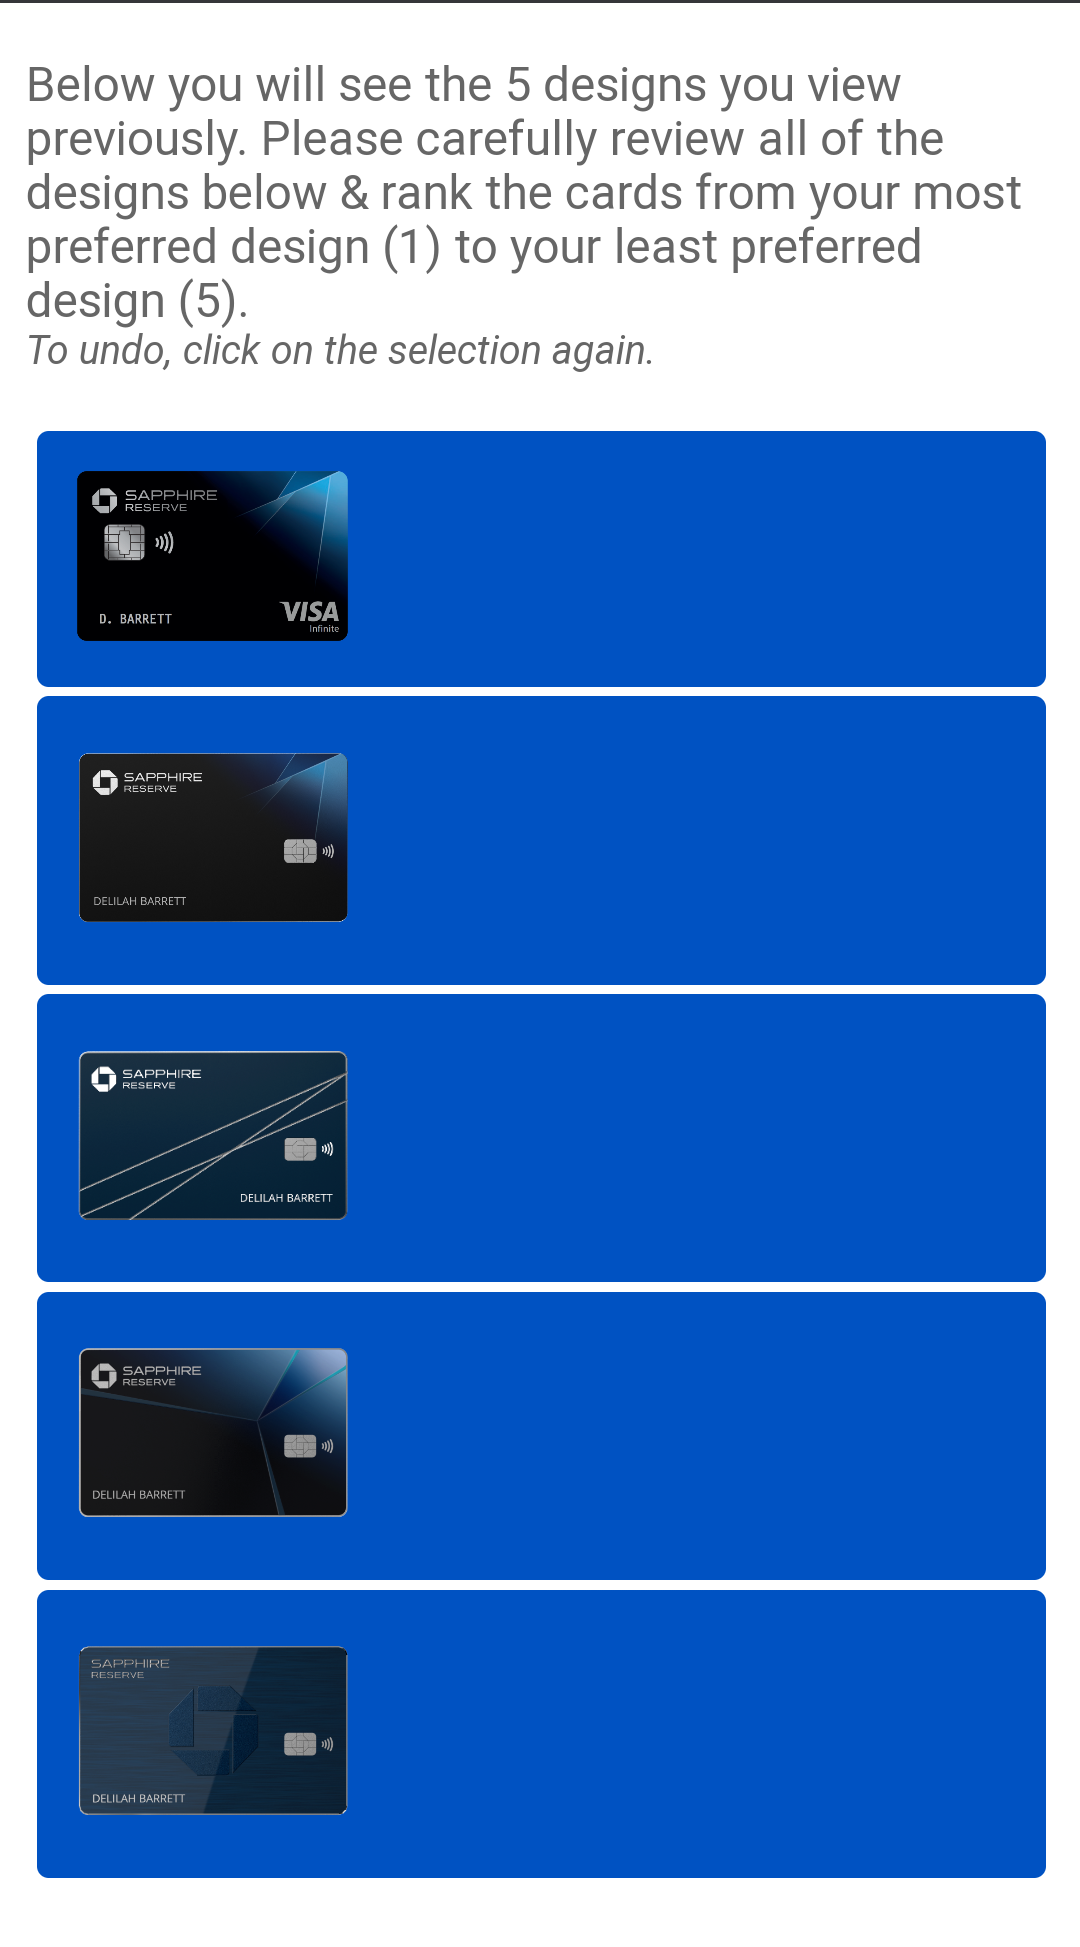 chase credit card designs